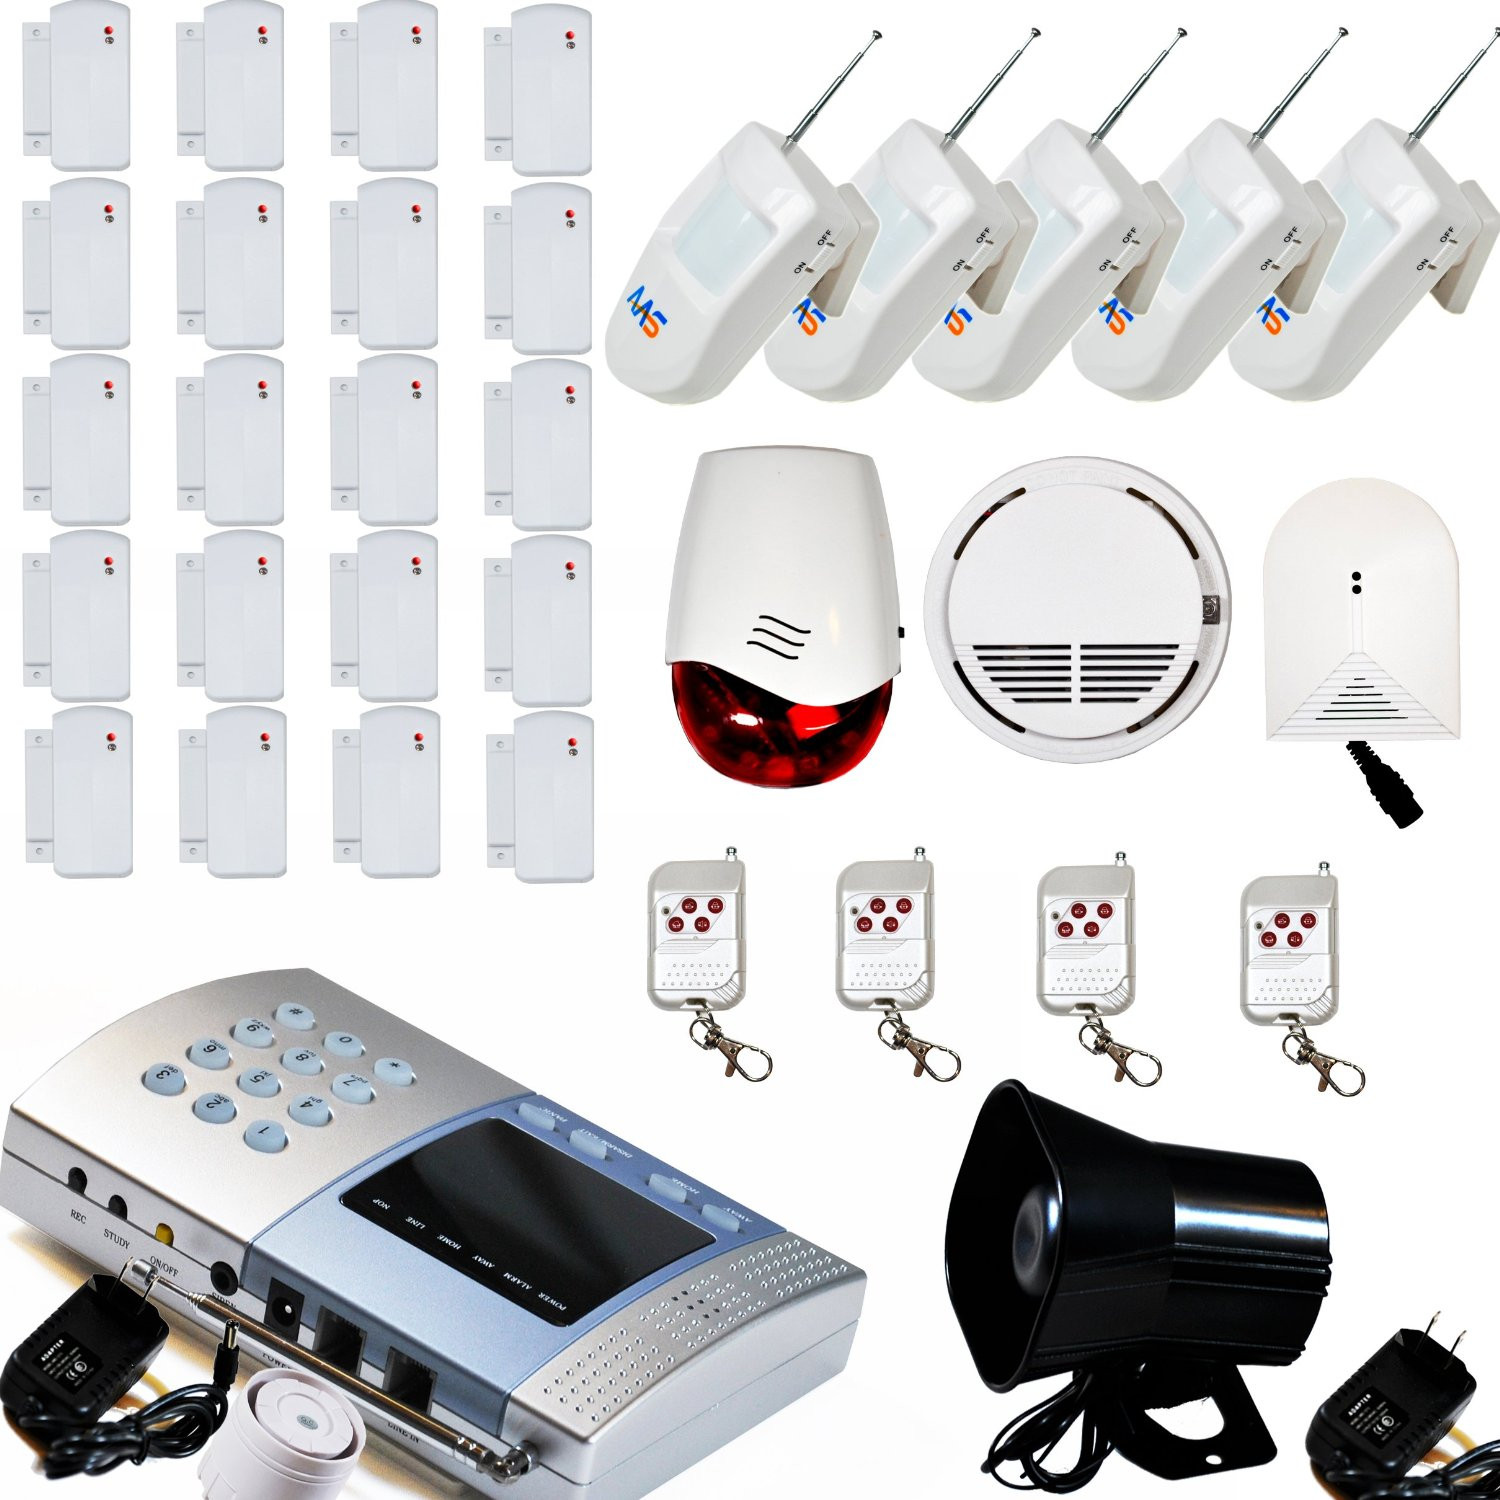 DIY Wireless Home Security
 AAS V600 Wireless Home Security Alarm System Kit DIY